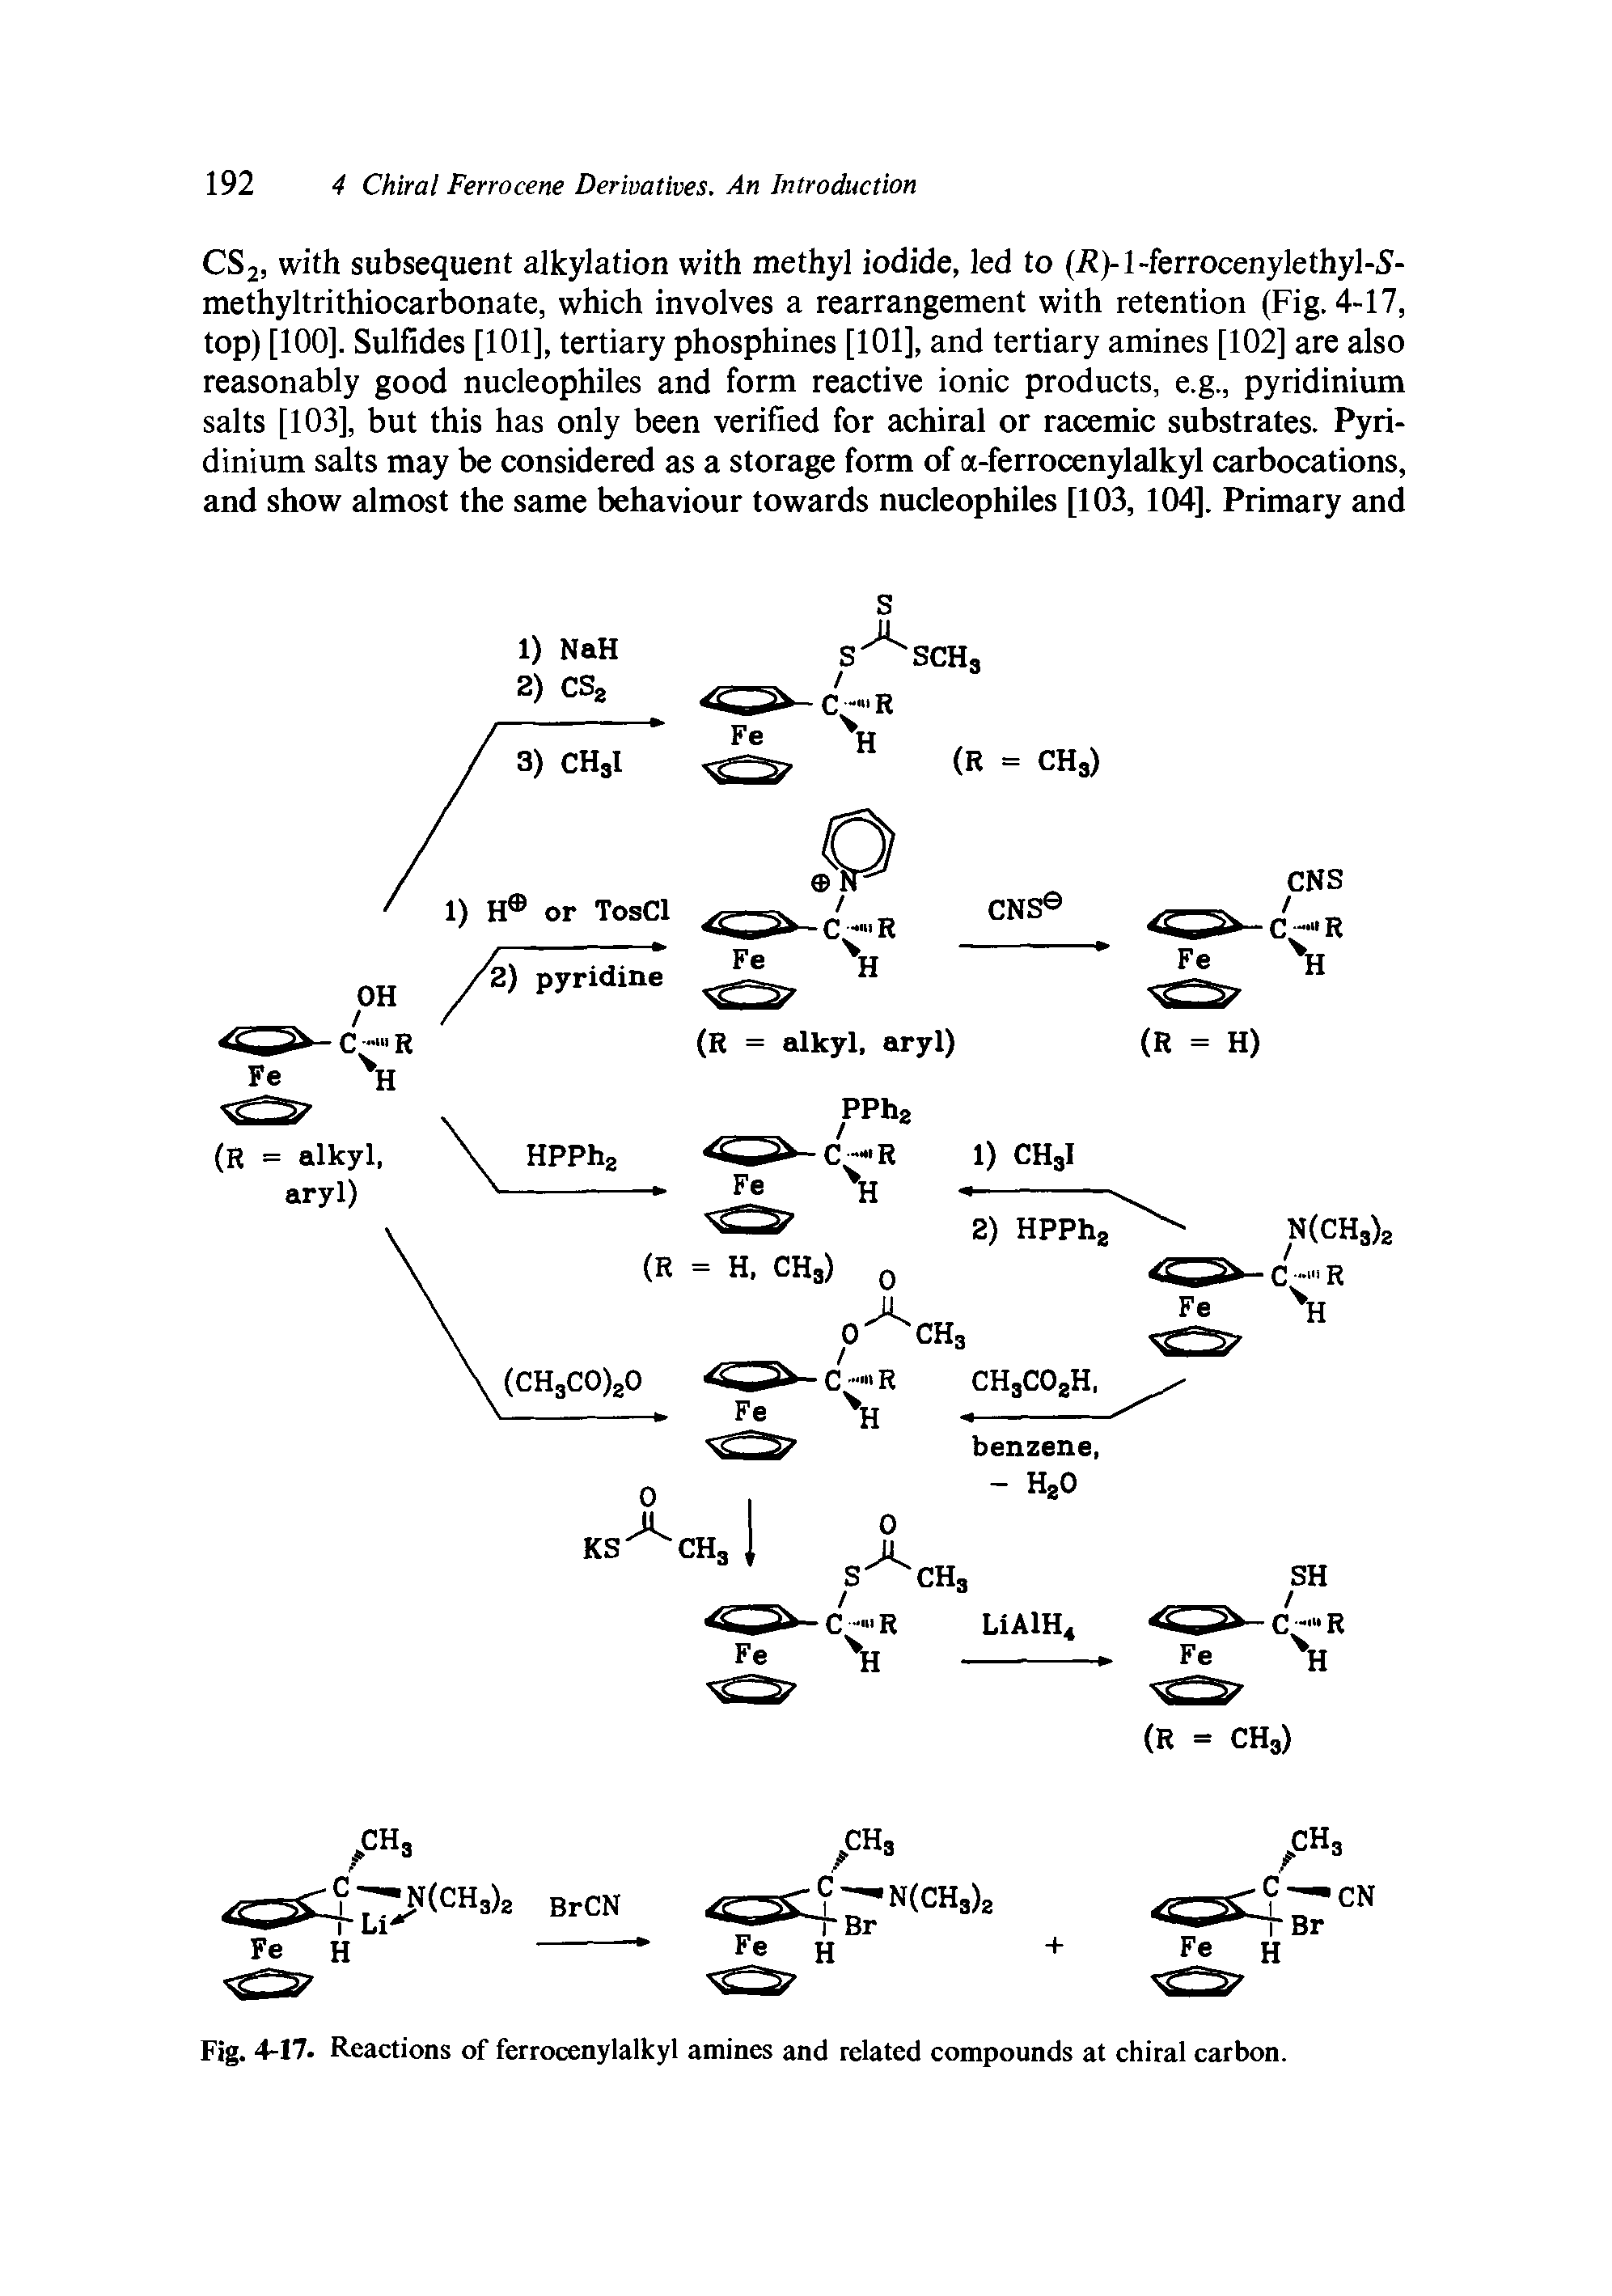 Fig. 4-17. Reactions of ferrocenylalkyl amines and related compounds at chiral carbon.